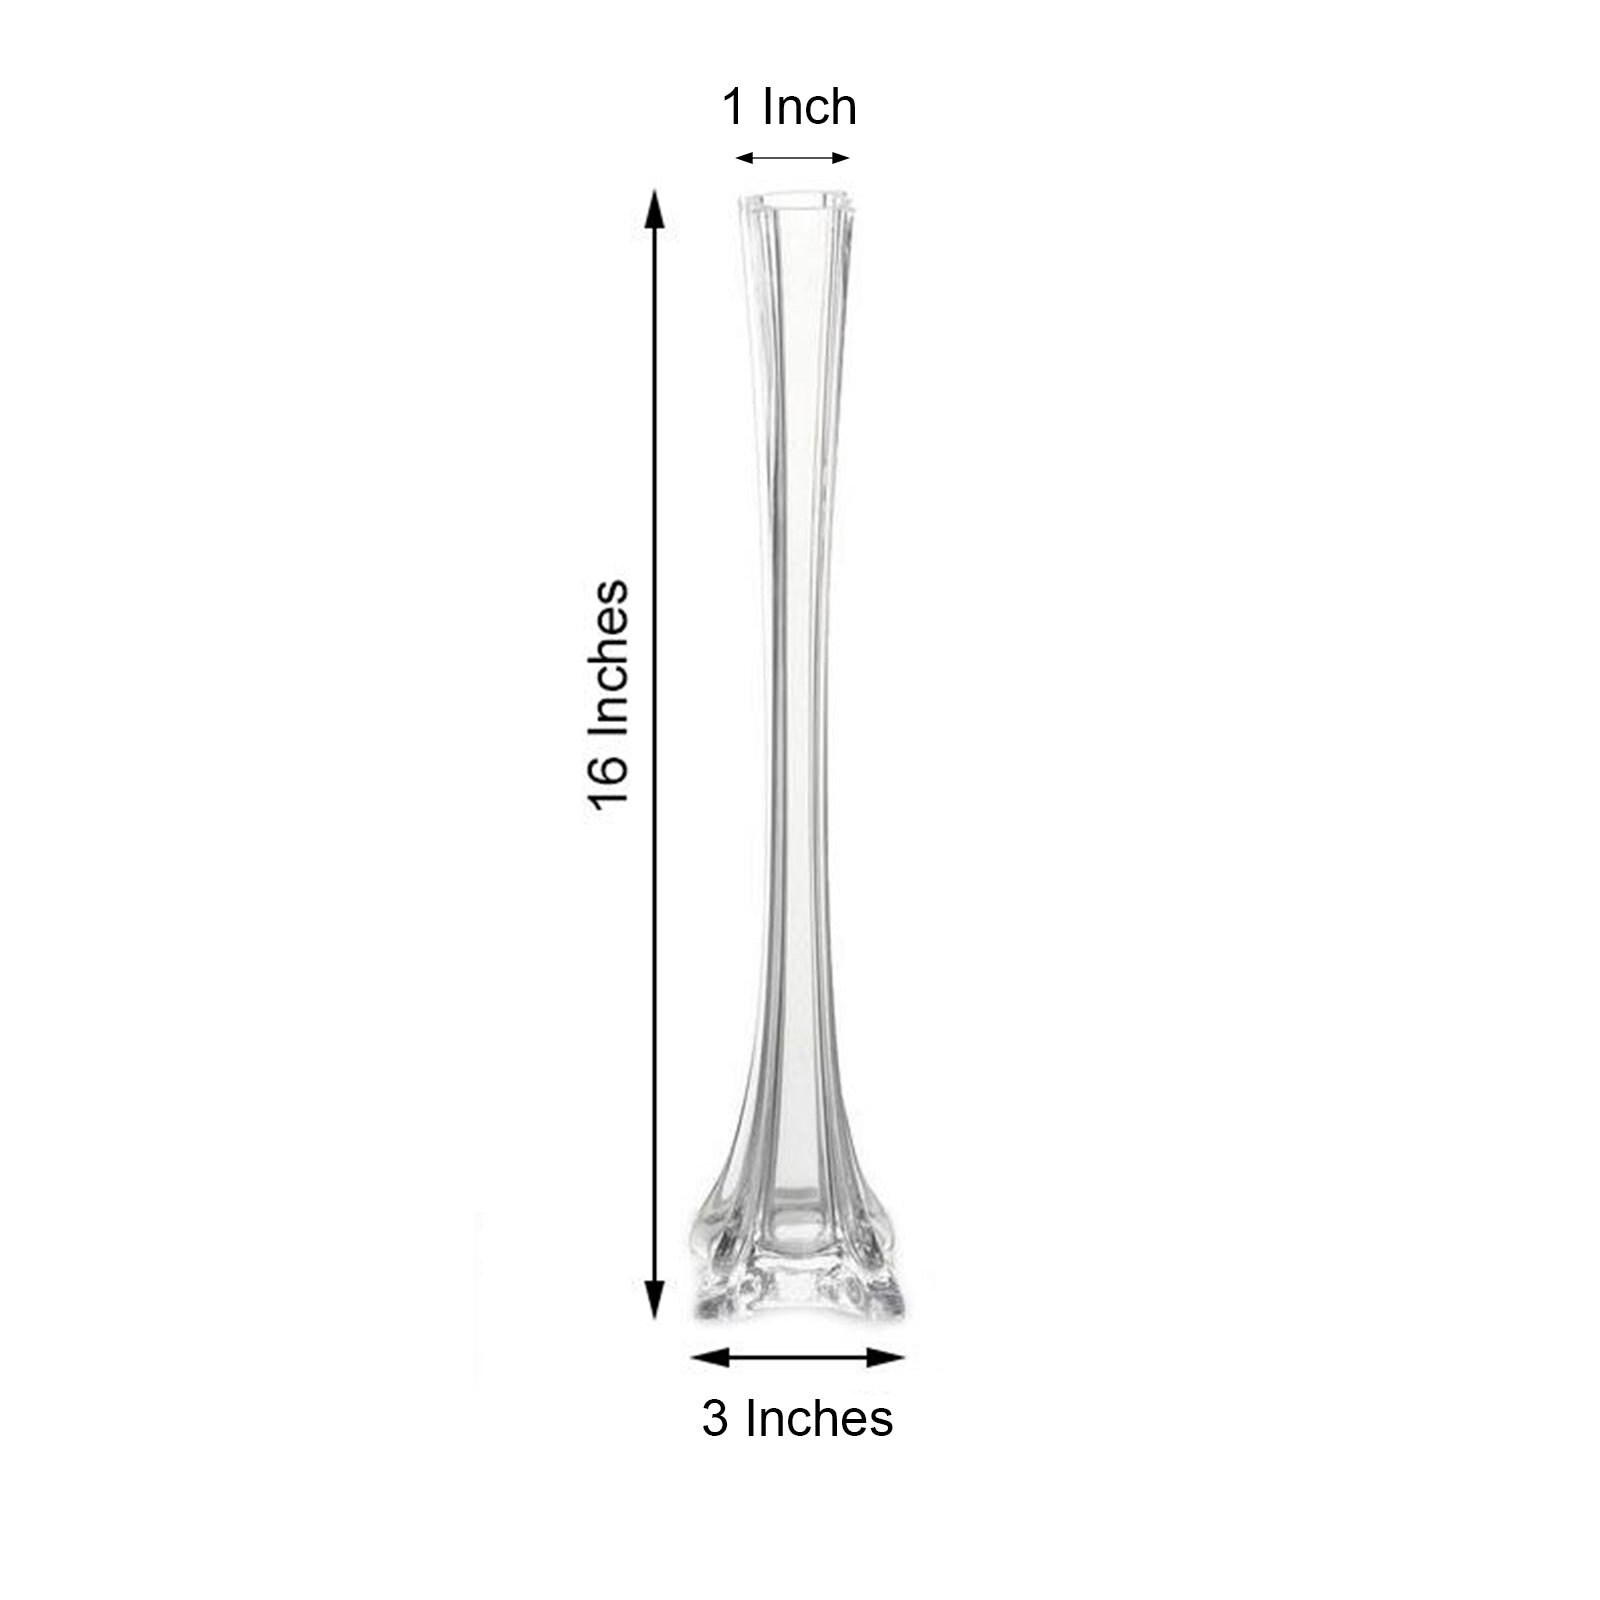  LACrafts 16 Glass Eiffel Tower Vases - 12 Pack - Clear : Home  & Kitchen